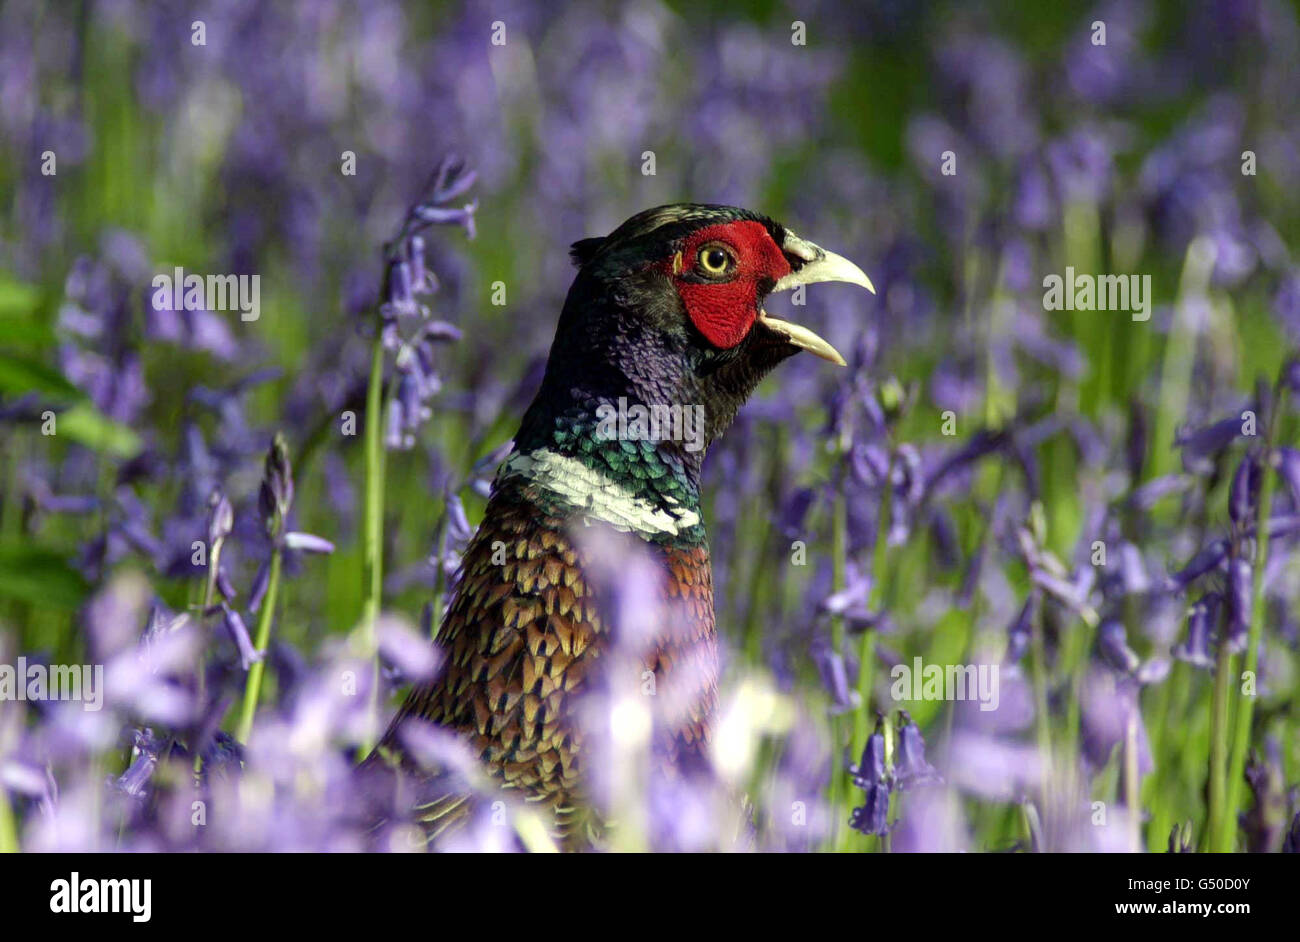 A lone pheasant pictured amongst the bluebells in woodland surrounding the 18th century Queen Charlotte's Cottage in Kew Gardens. The Bluebells and Broomsticks Springtime programme starts on 30/4/00 at the gardens. Stock Photo